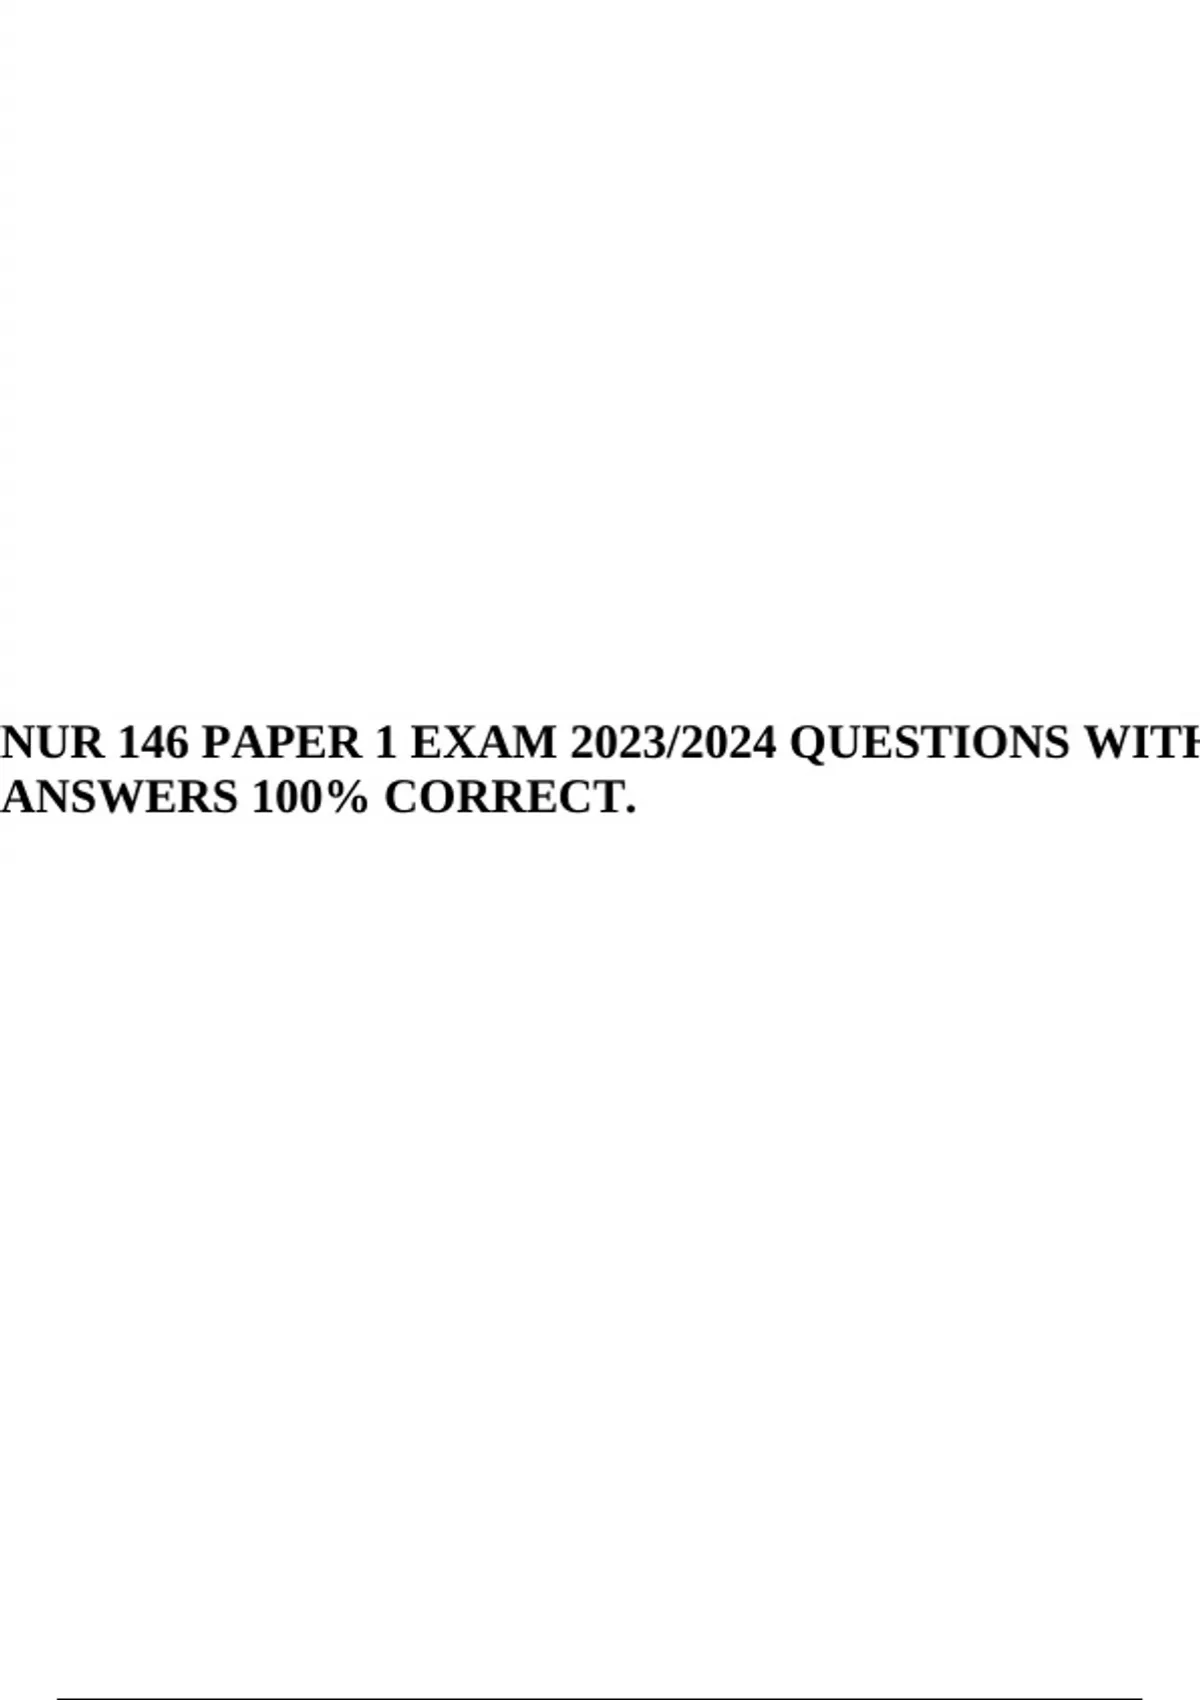 NUR 146 (MCN2 RLE) P2 Exam Correct Questions and Answers 2023/2024